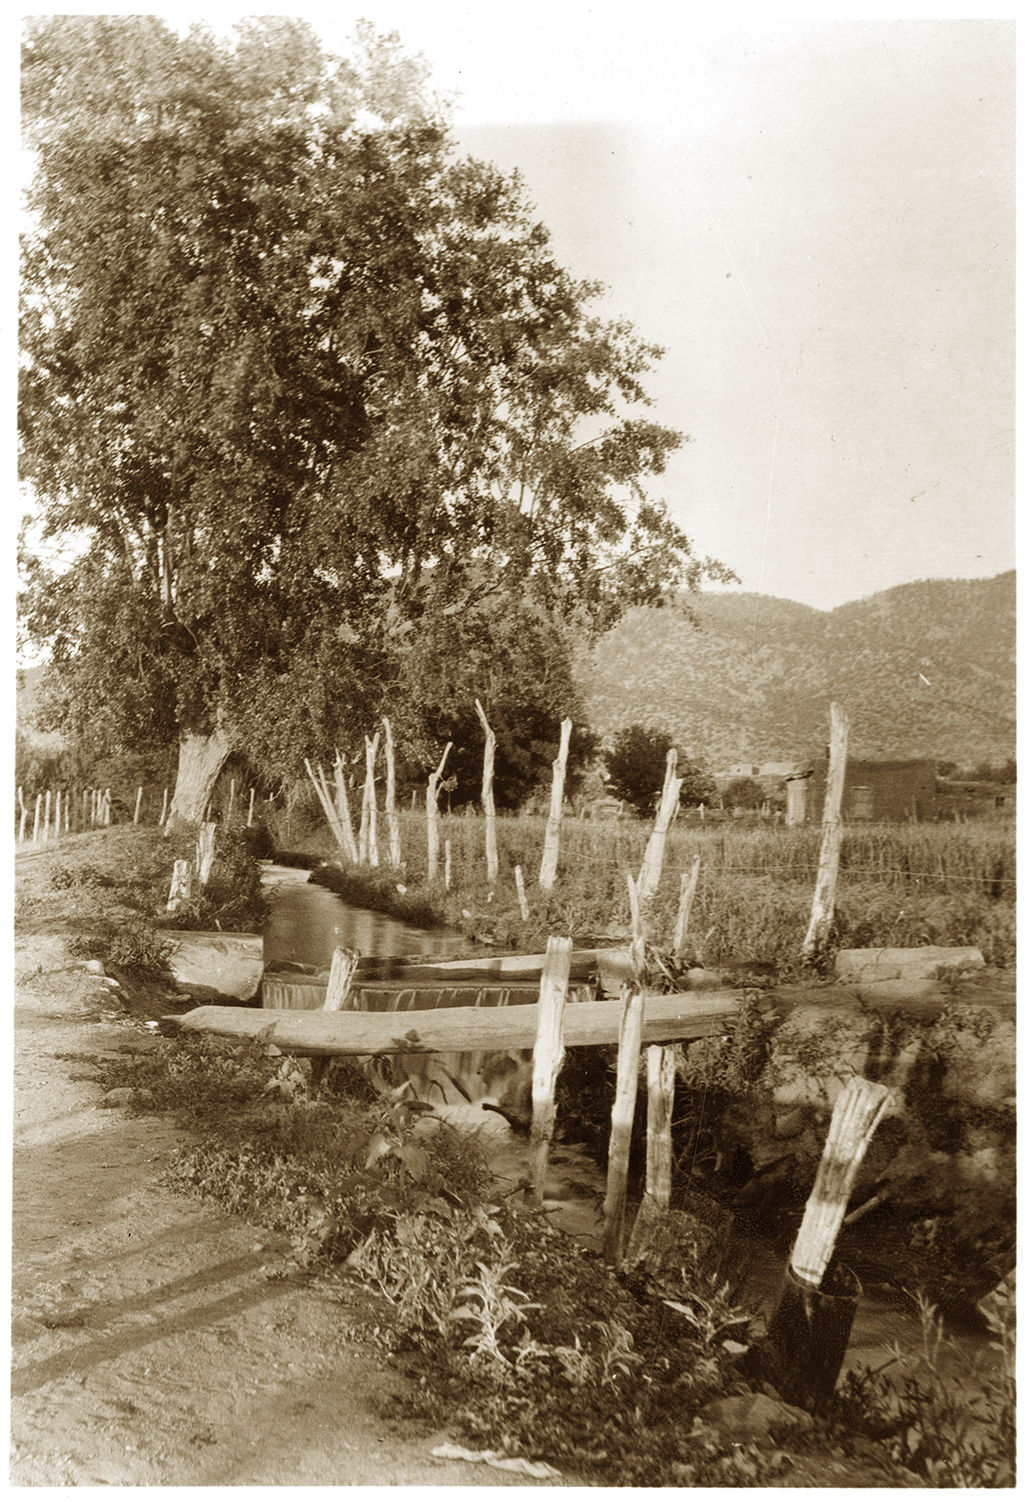 Acequia Madre irrigation ditch, circa 1890-1910, Neg. No. 055021; courtesy Palace of the Governors Photo Archives NMHM/DCA)